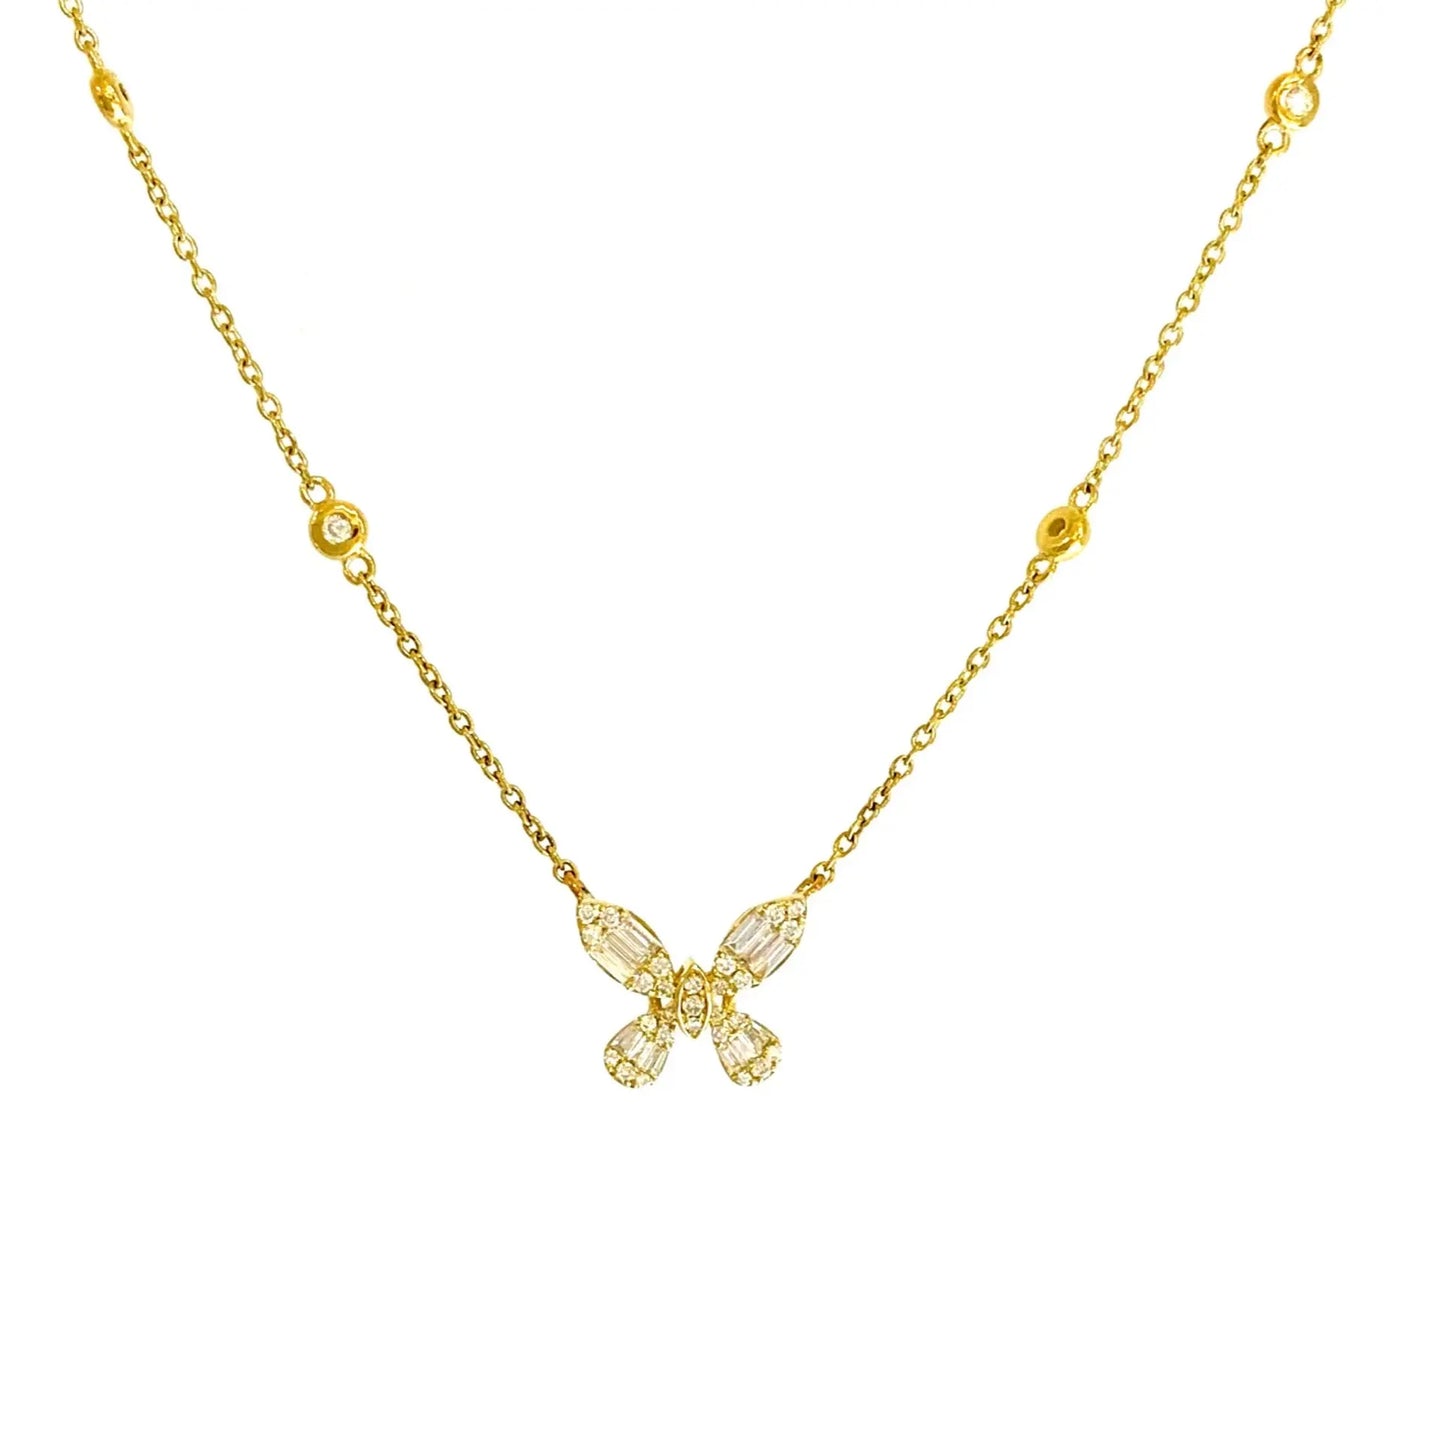 Yellow Gold Butterfly Shaped Diamond Necklace - Danson Jewelers Yellow Gold Necklace 